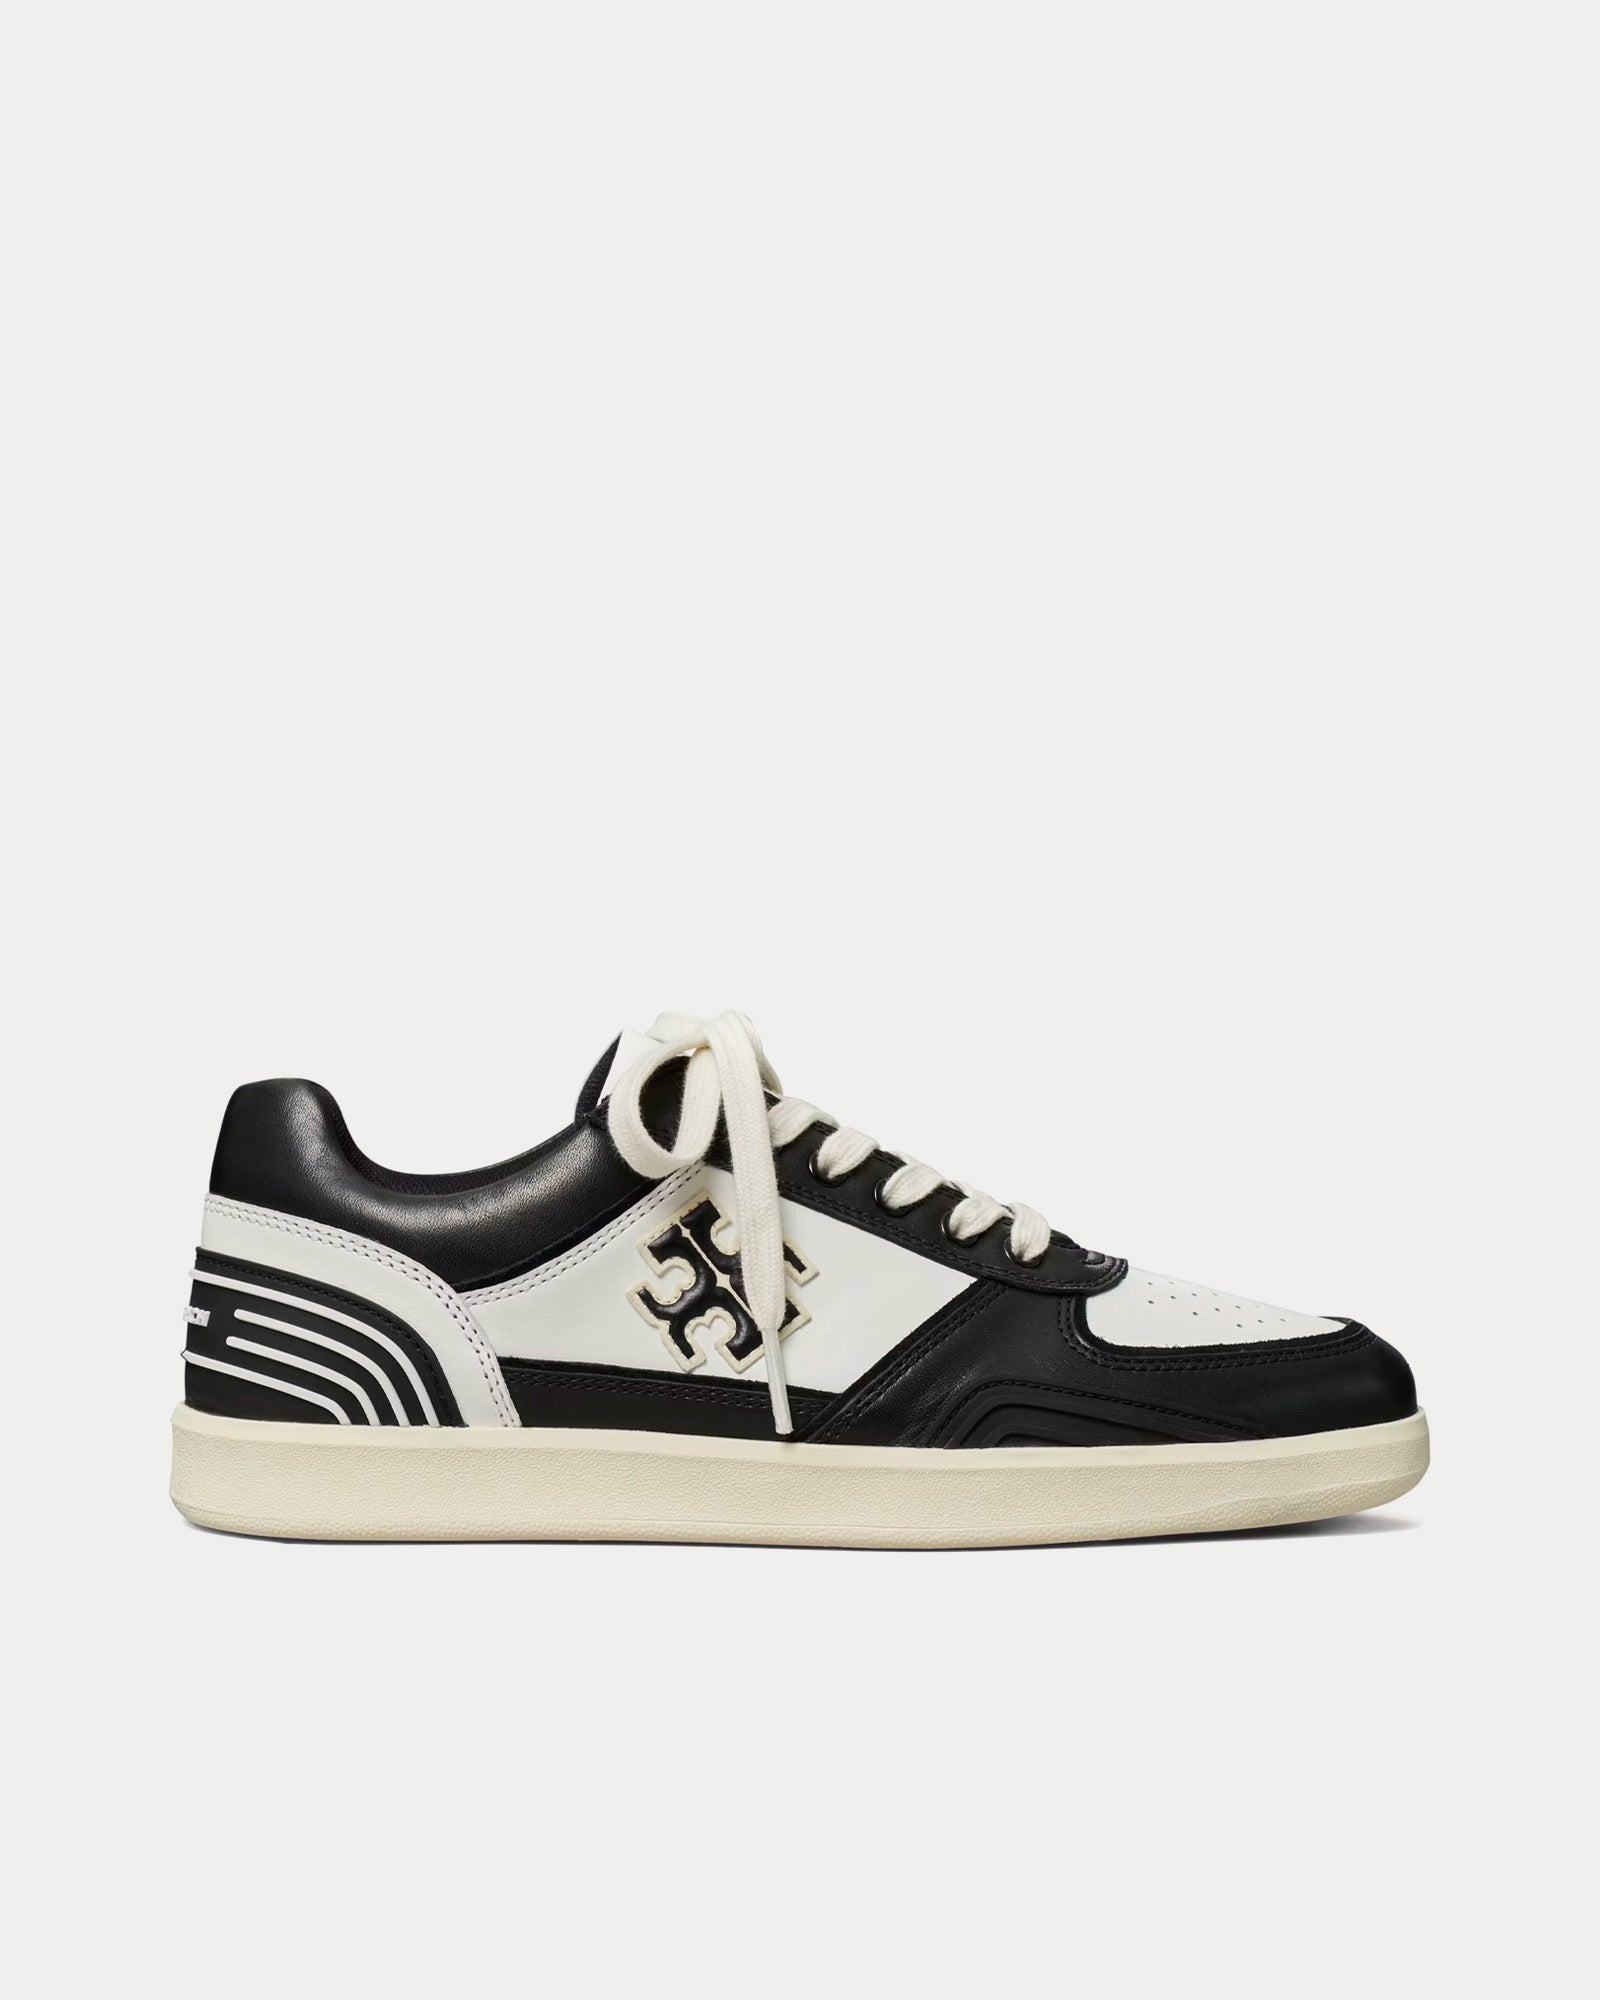 Tory Burch - Clover Court Purity / Perfect Black Low Top Sneakers